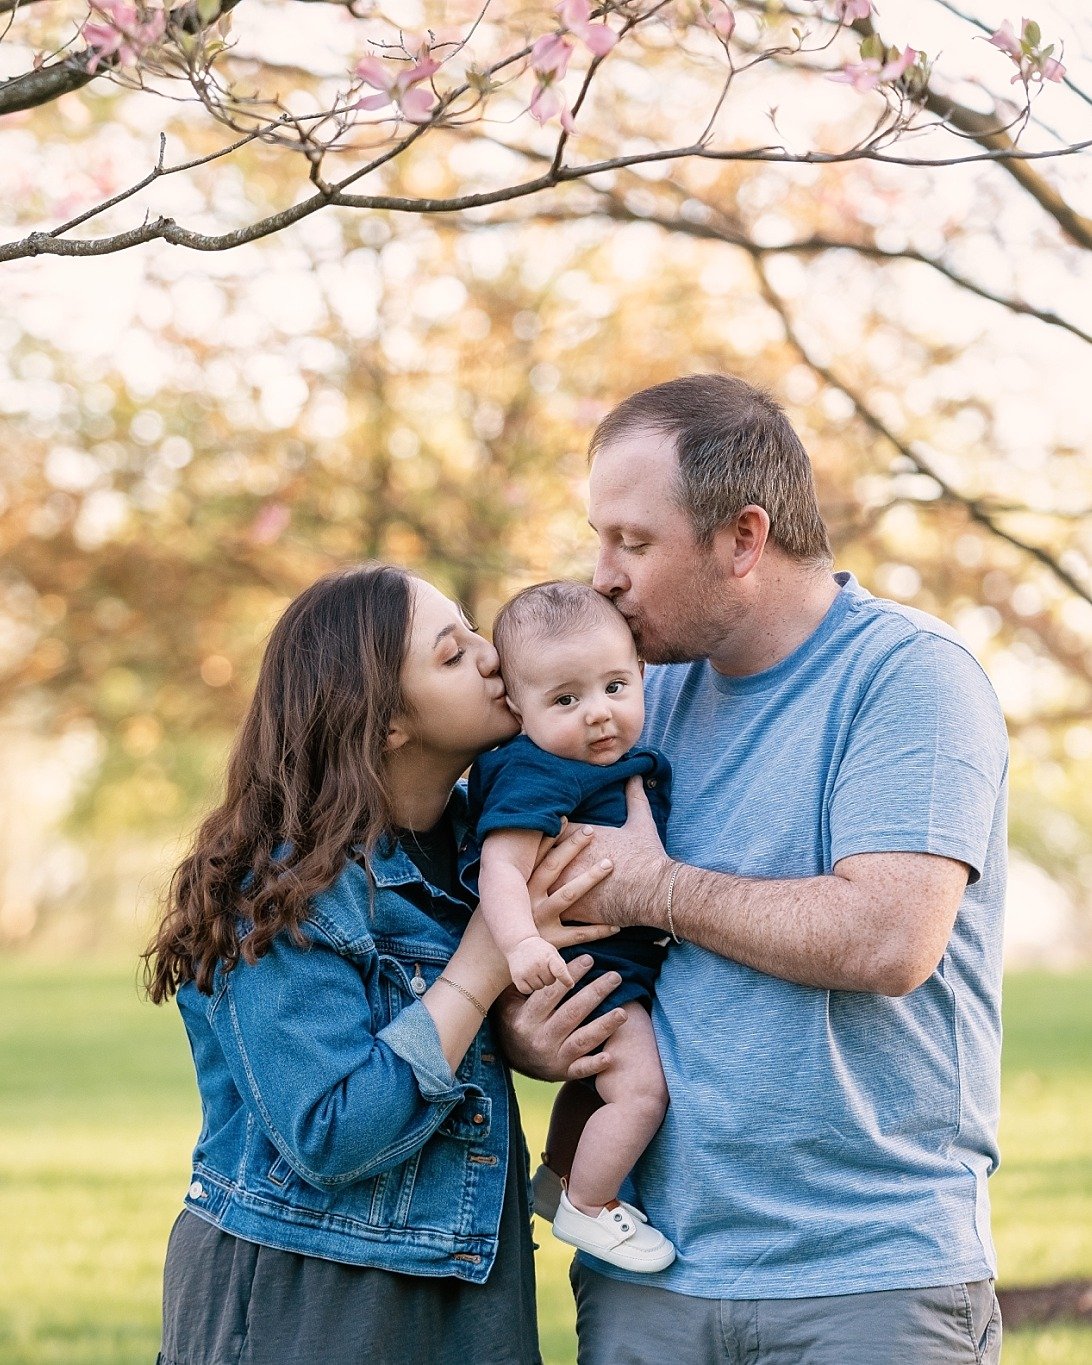 Family sessions &amp; Extended Family sessions are booking. Now is the time to get photos updated! I've already seen so many amazing families! 🥰📸

Link to book: https://app.acuityscheduling.com/schedule.php?owner=18802854